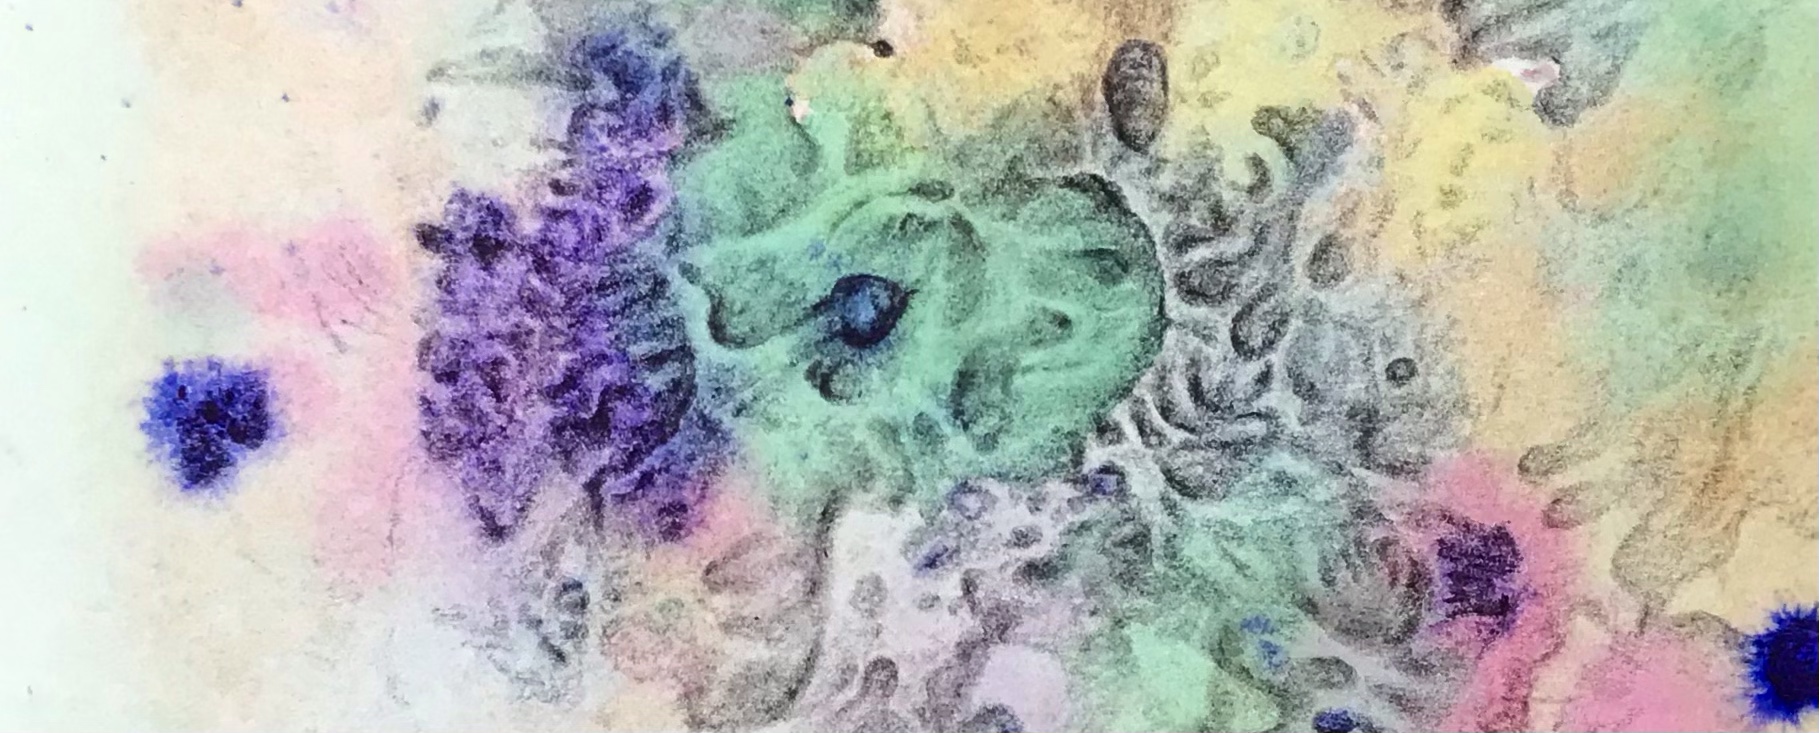 Detail of a biomorphic graphite drawing over an abstract watercolor painting by MJ Seal